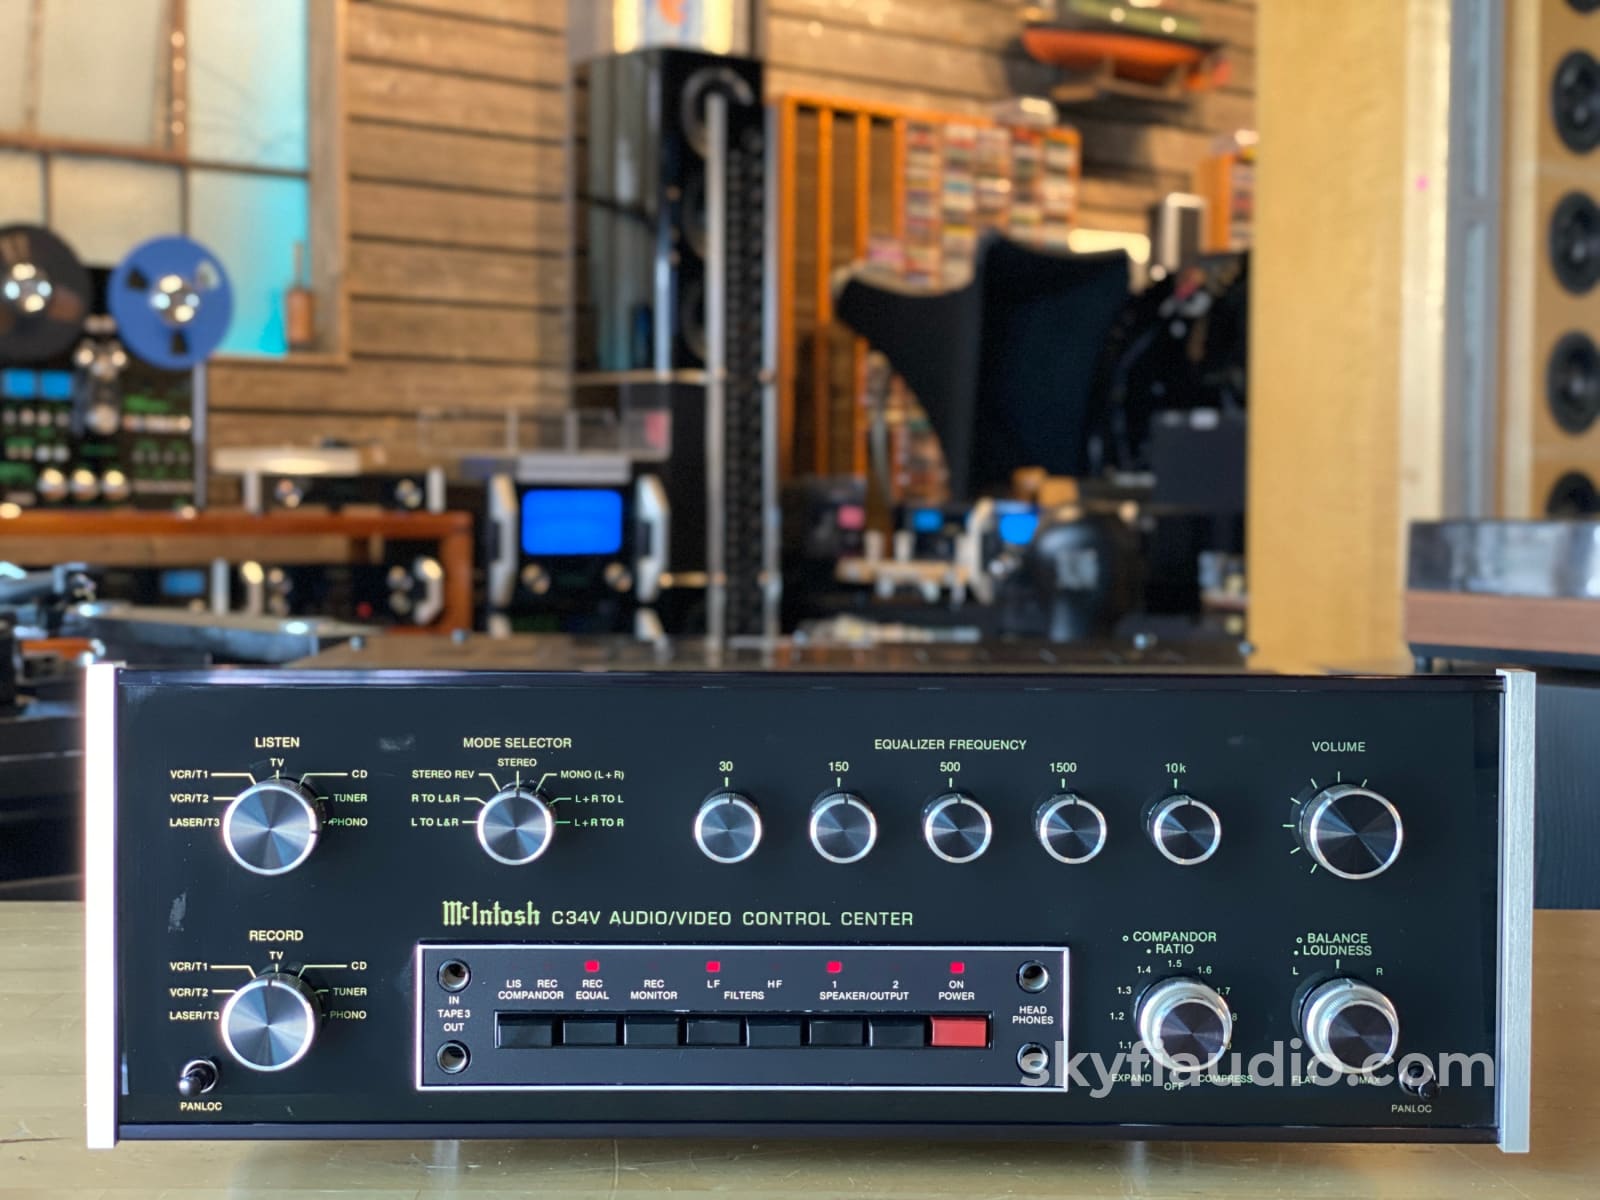 Mcintosh C34V Vintage Preamp With 20W X 2 Monitor Amp Section And 5-Band Eq Integrated Amplifier